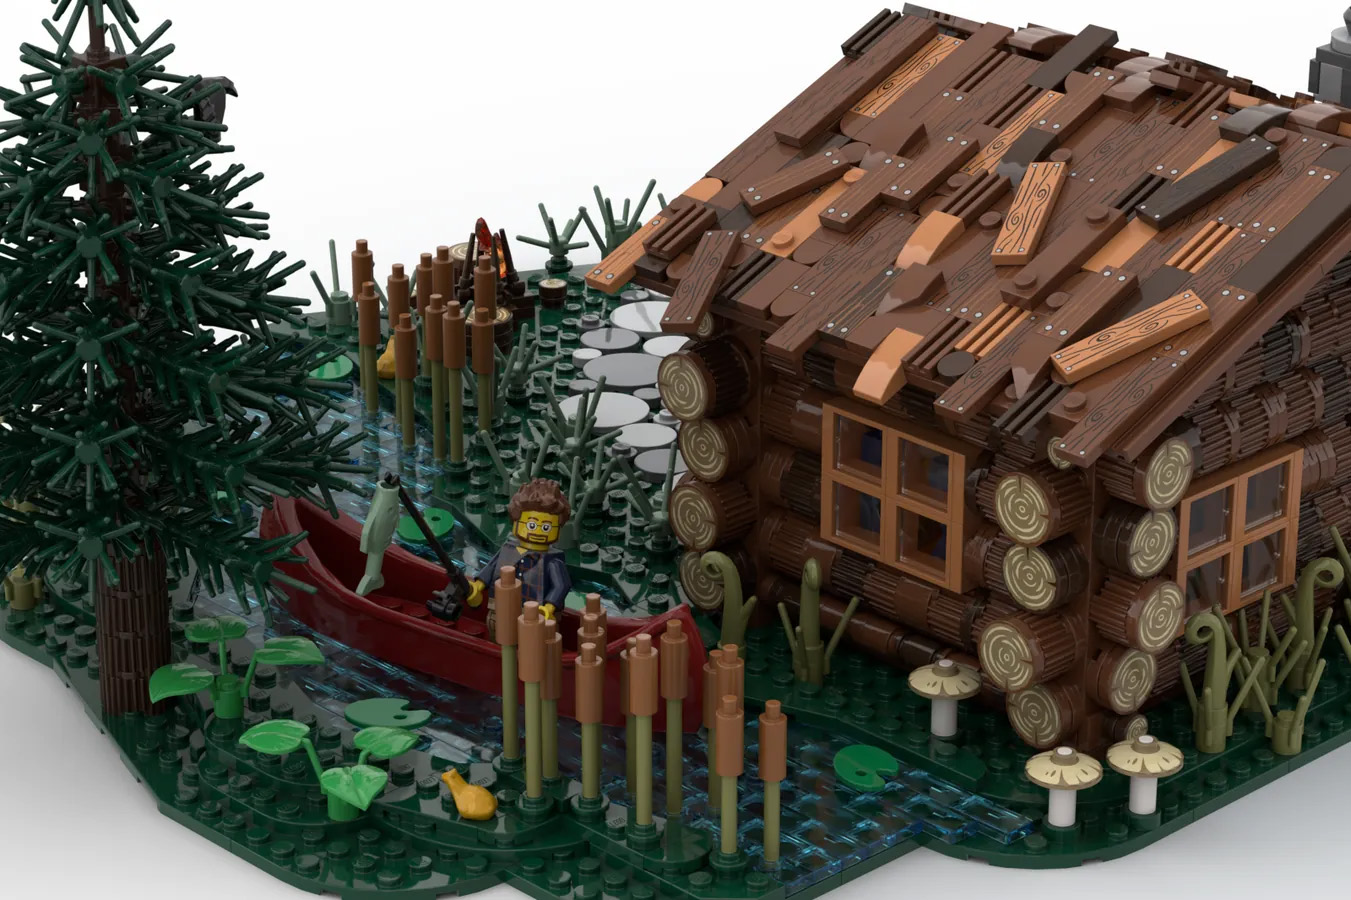 LOG CABIN Achieves 10K Support on LEGO IDEAS